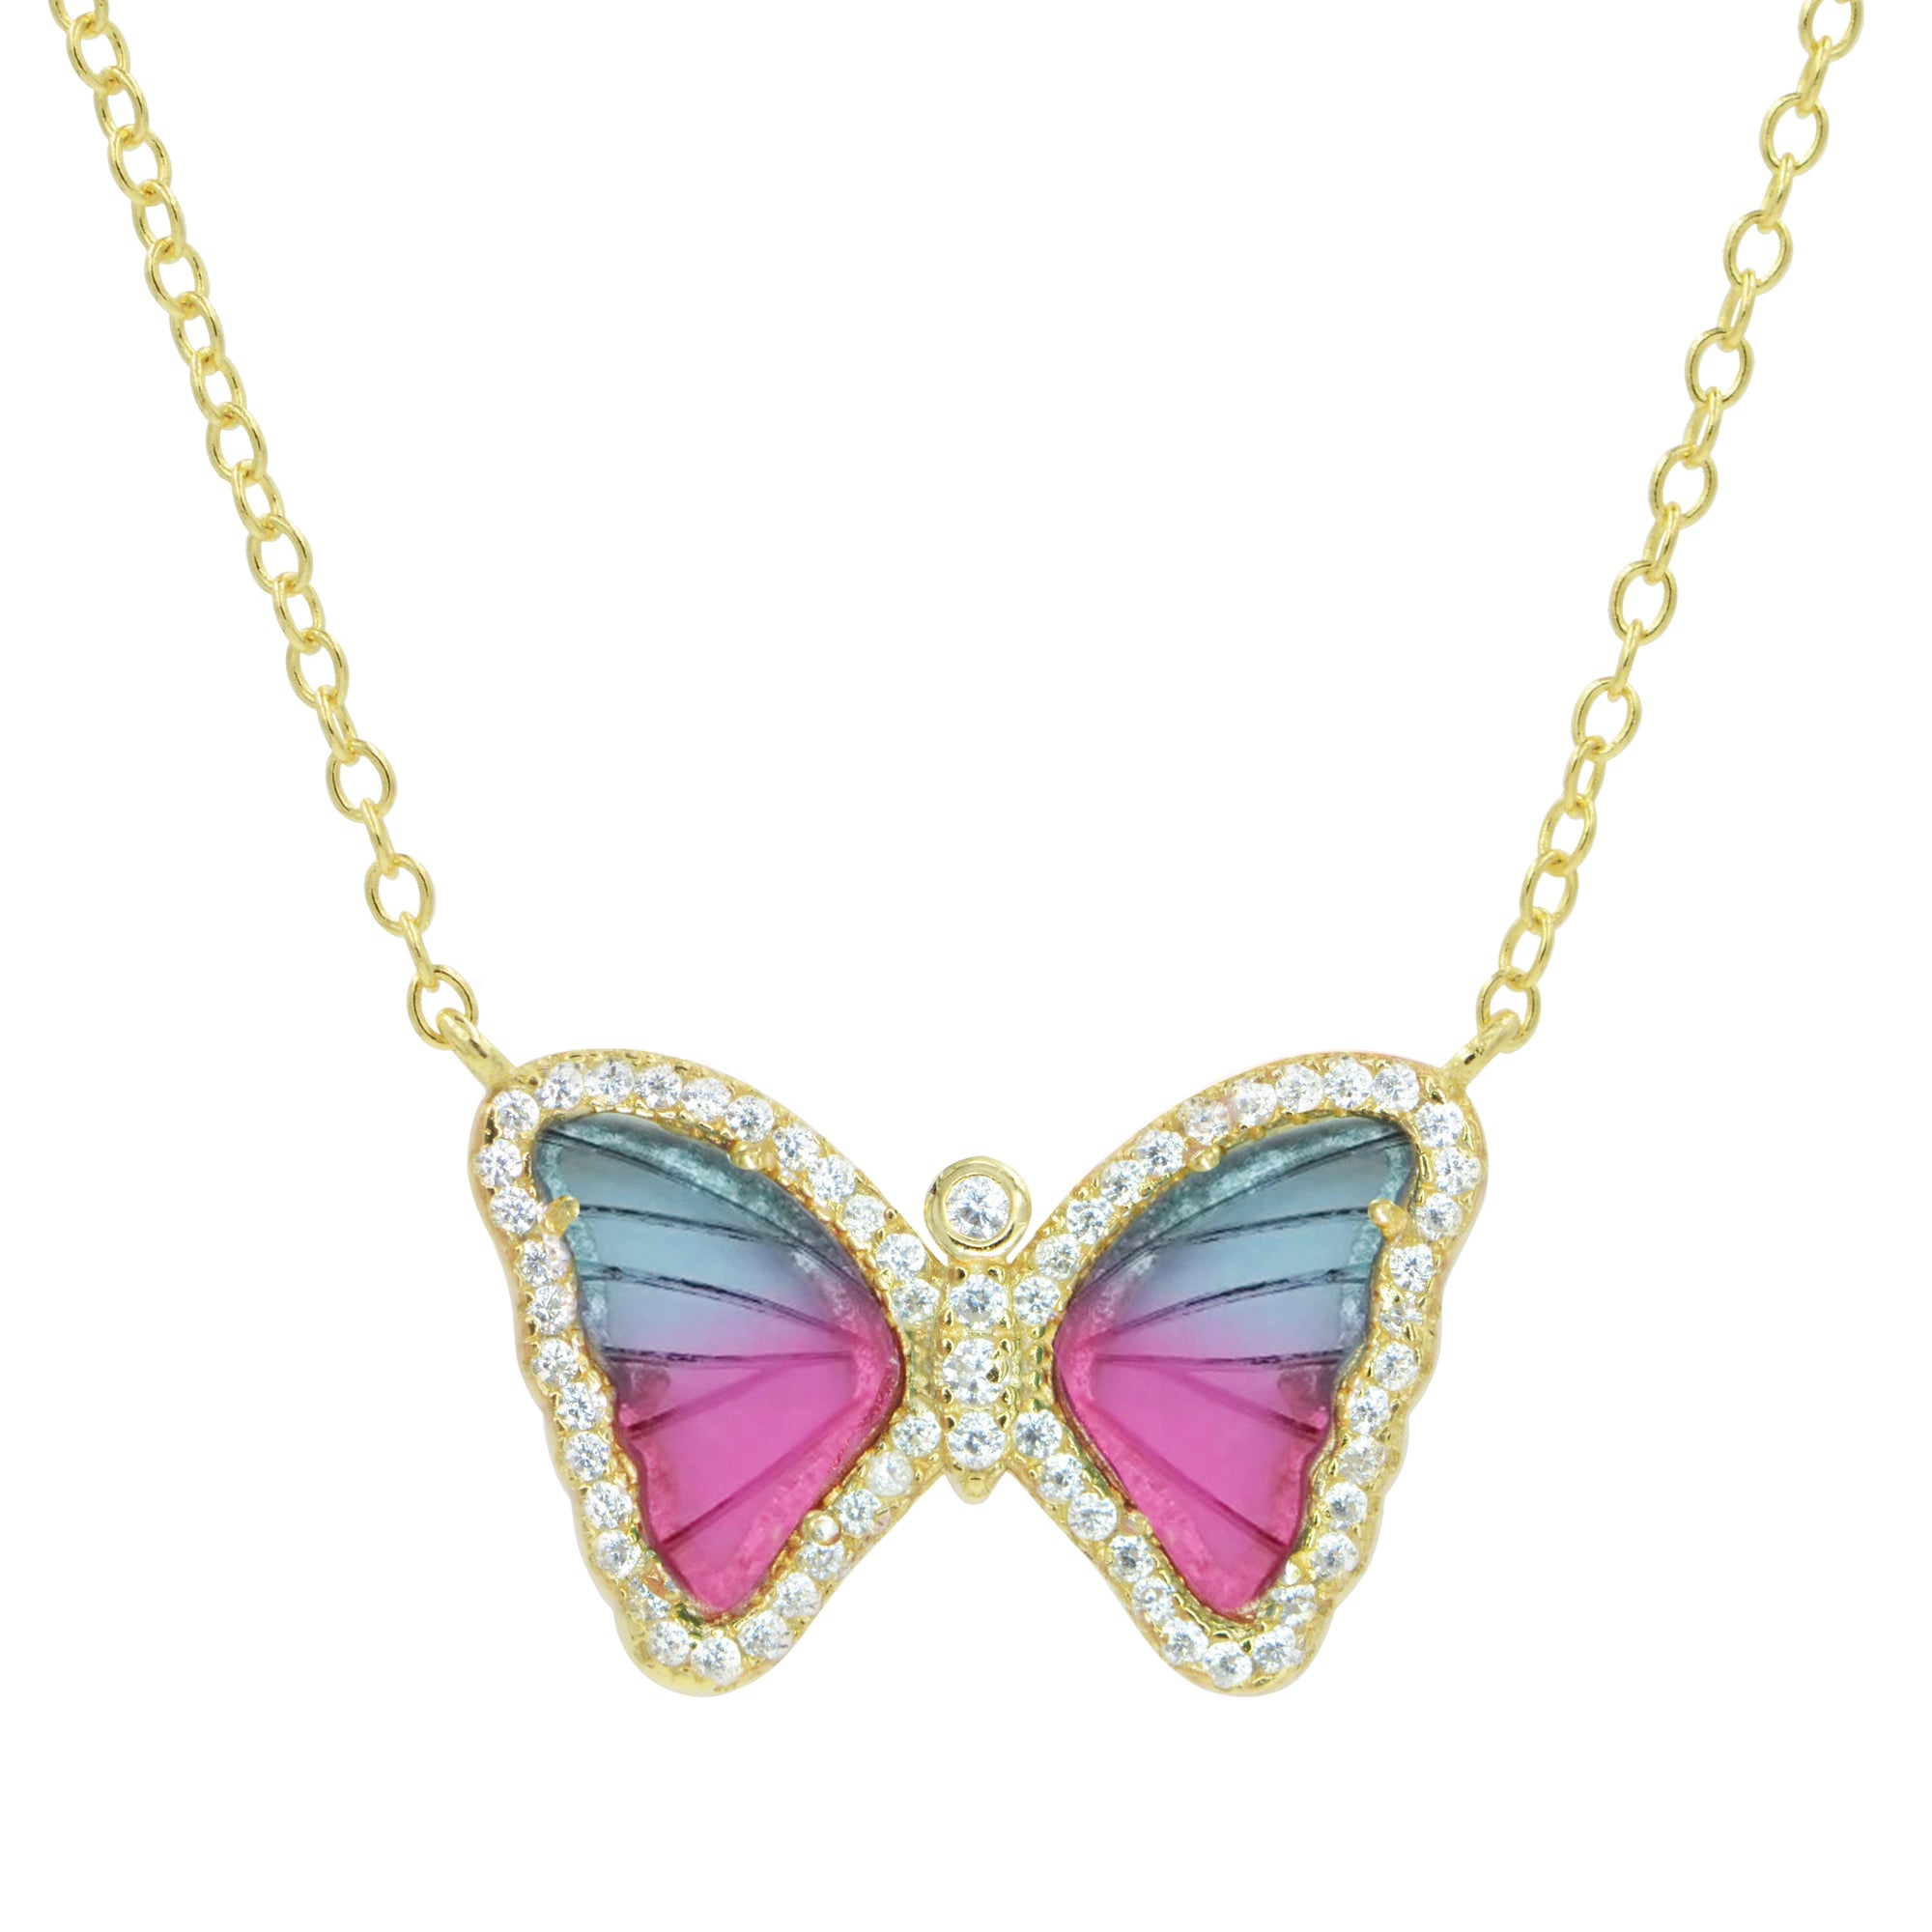 Mini Butterfly Necklace in Tourmaline